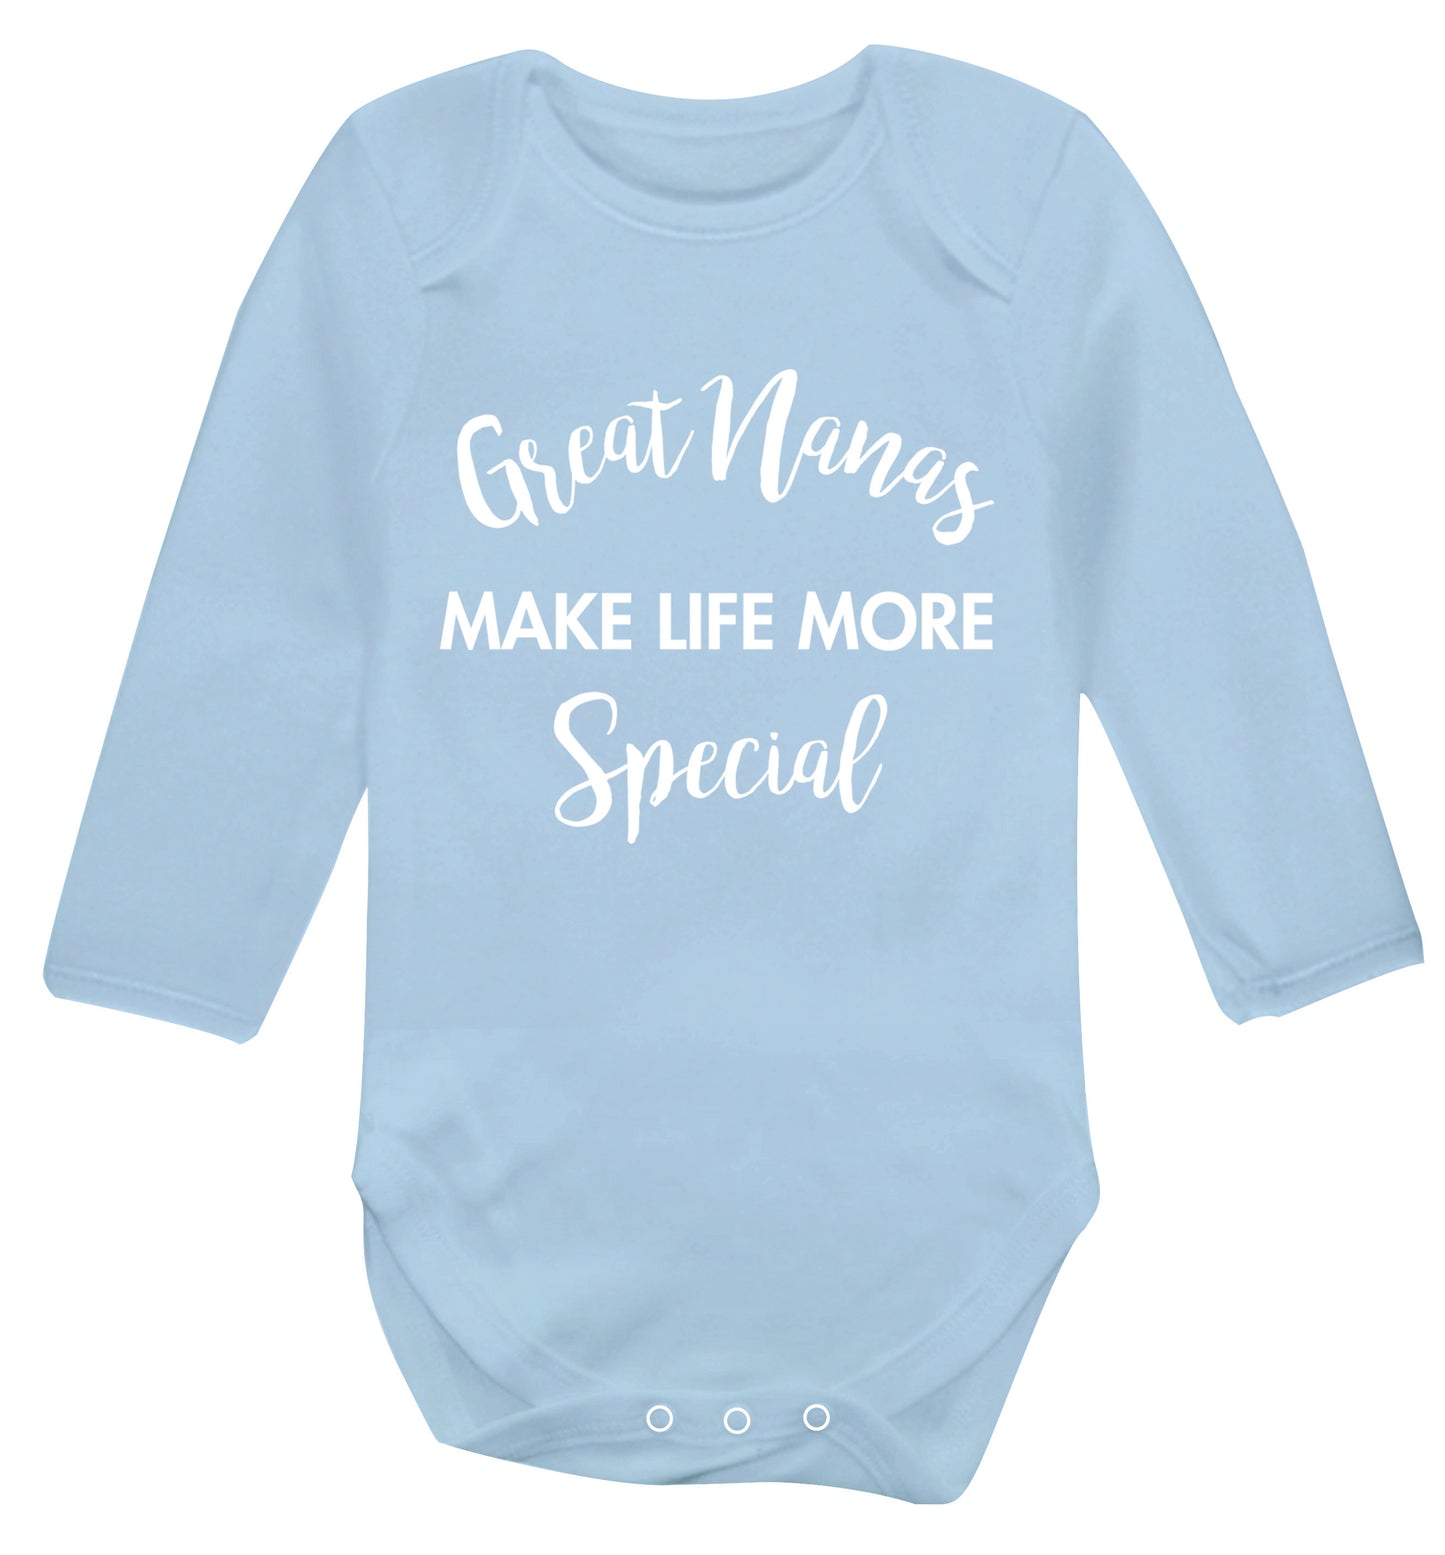 Great nanas make life more special Baby Vest long sleeved pale blue 6-12 months